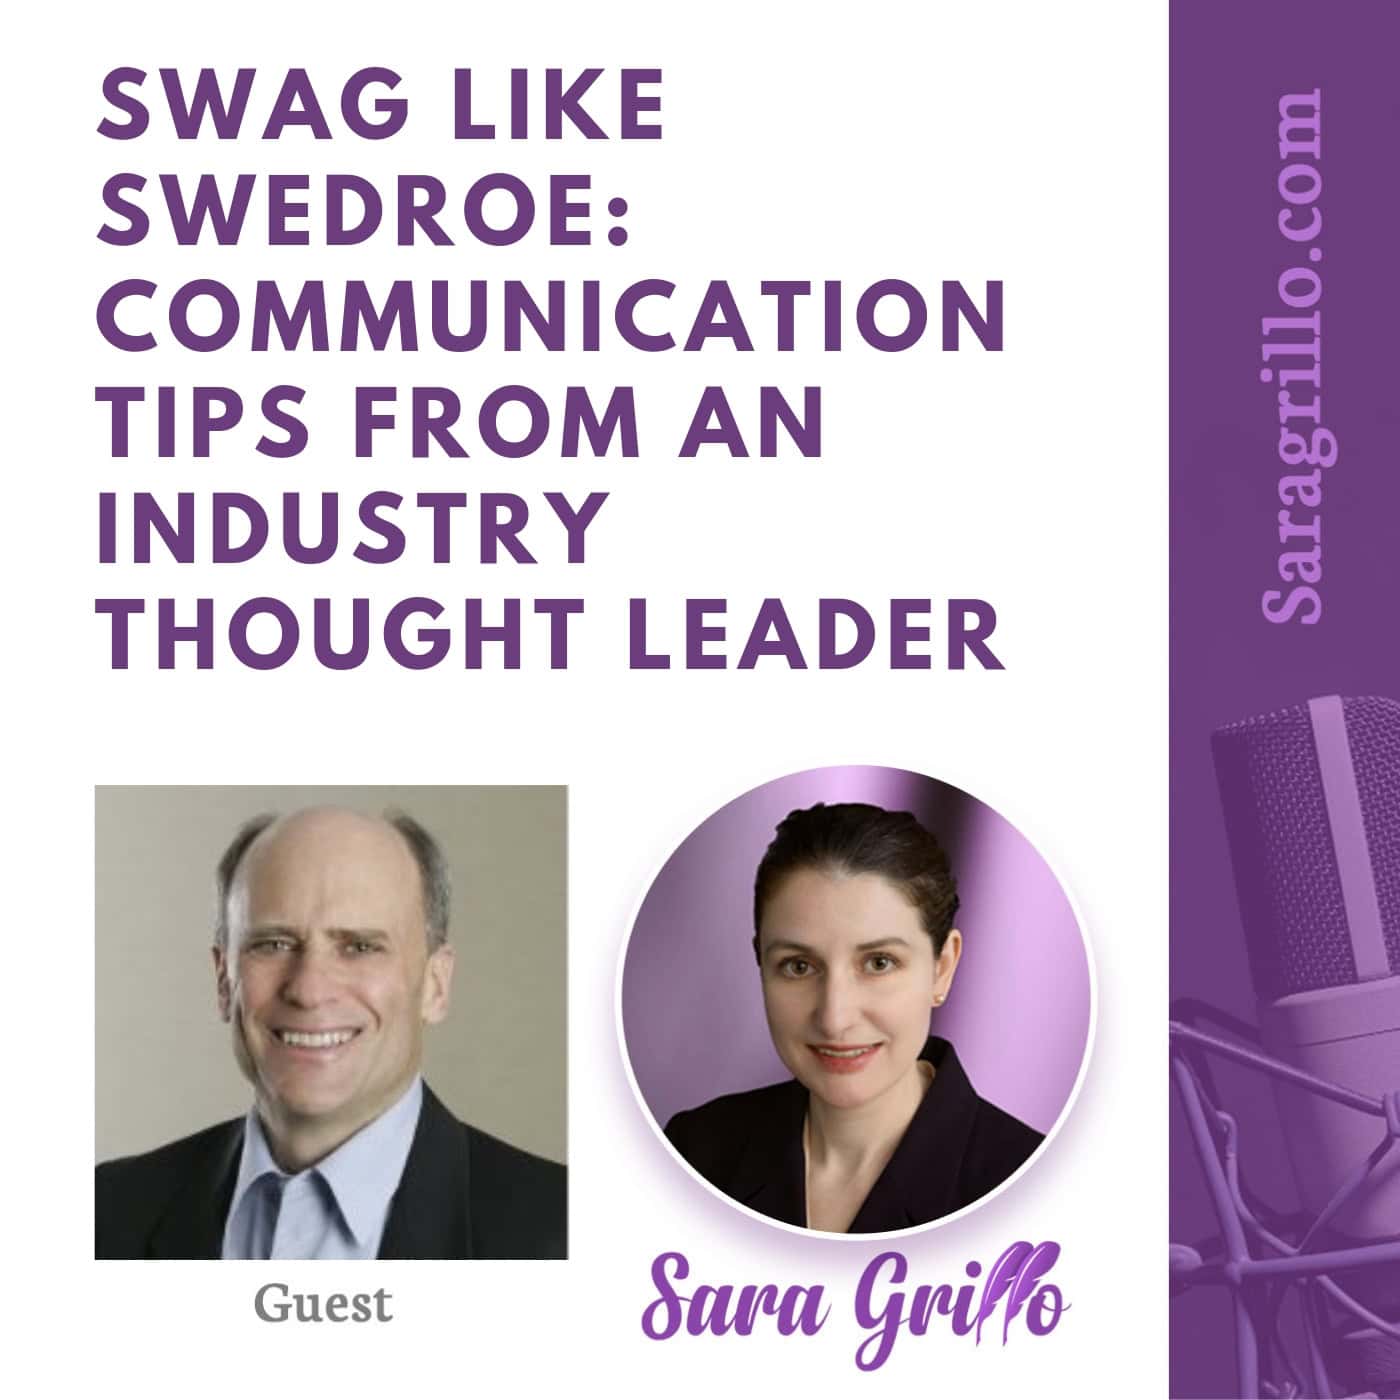 Communication tips from Larry Swedroe